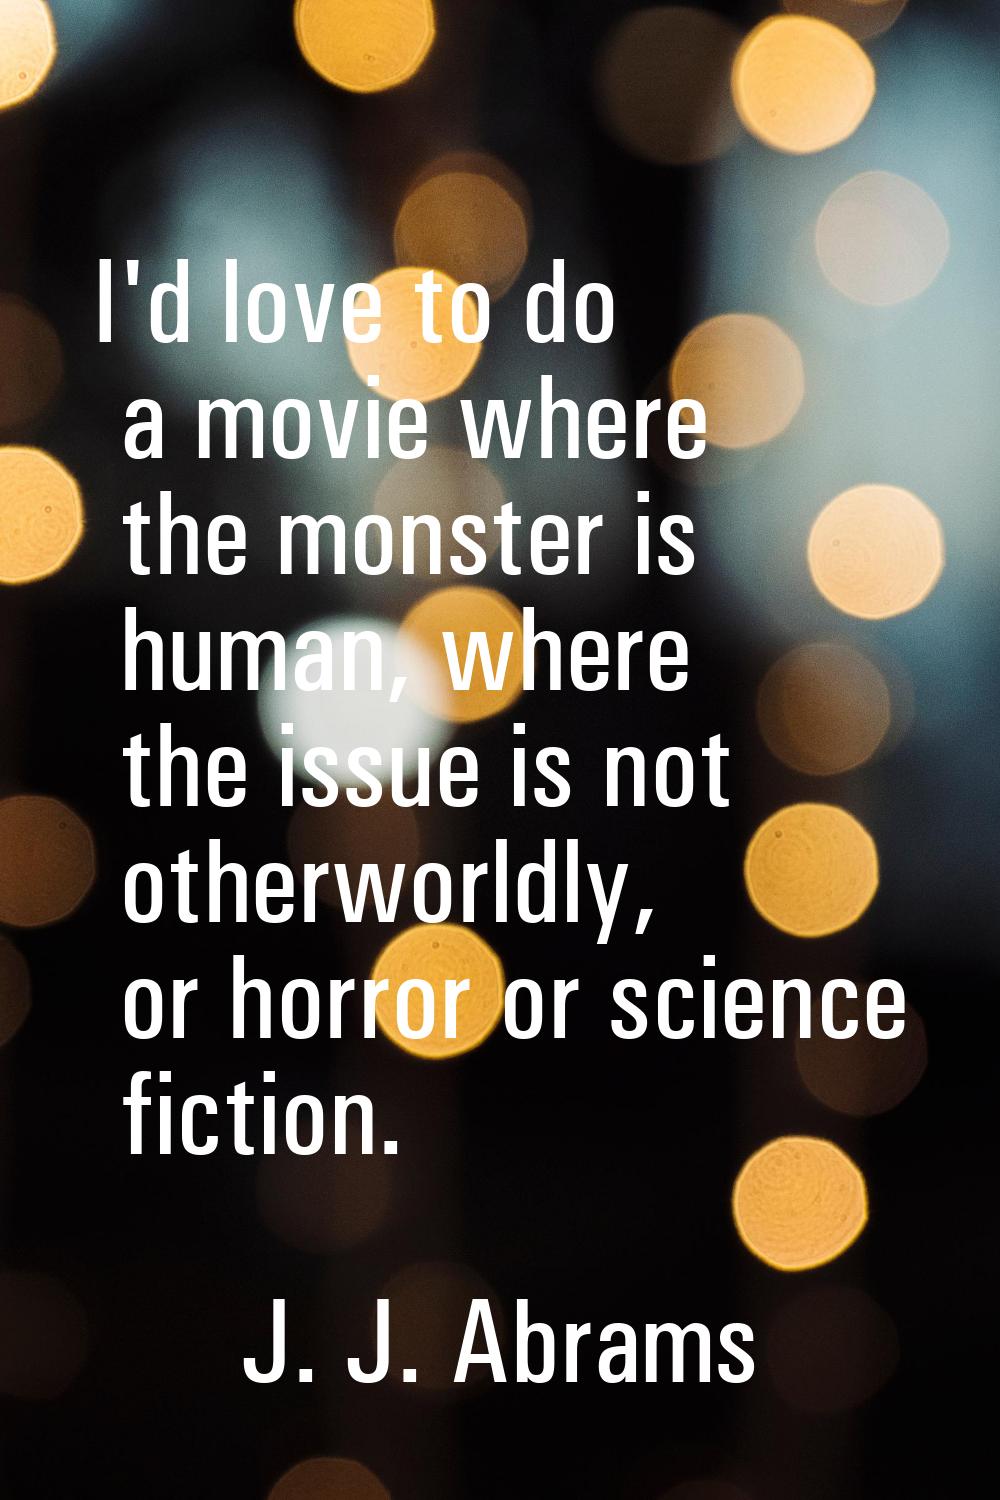 I'd love to do a movie where the monster is human, where the issue is not otherworldly, or horror o